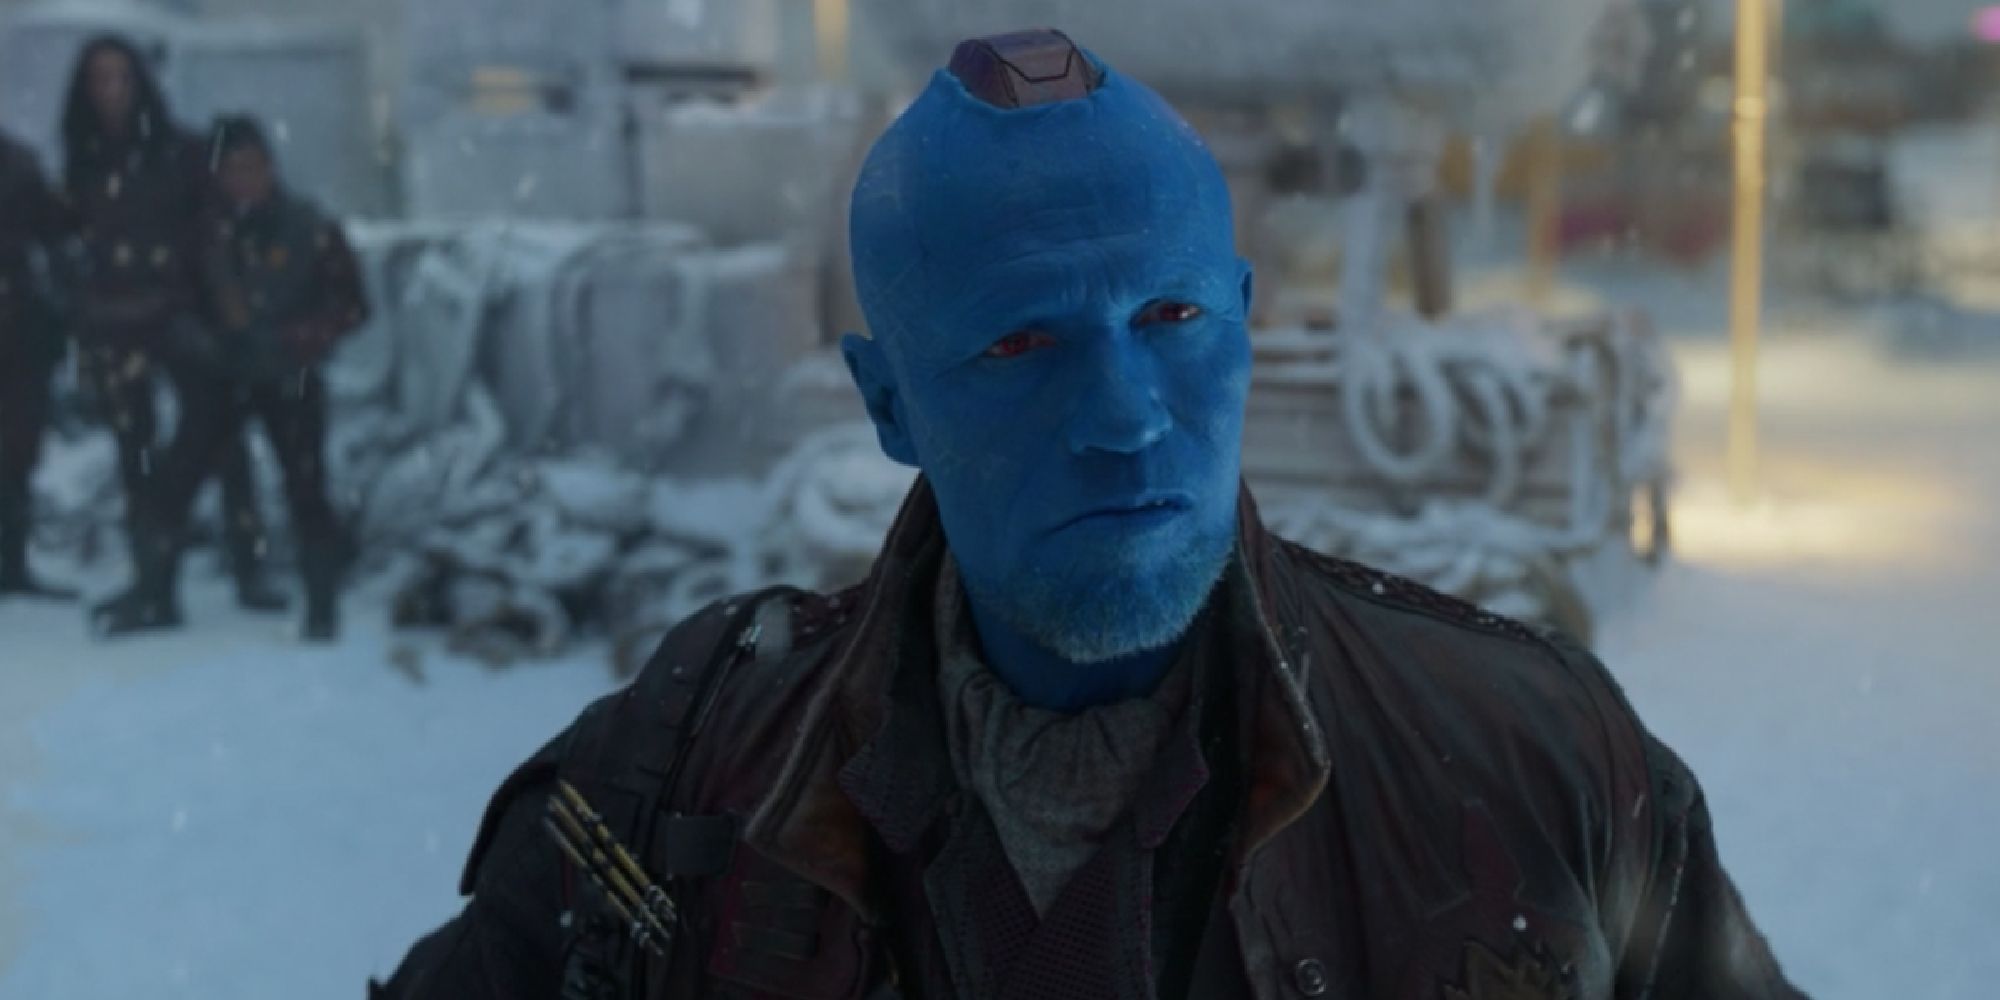 Yondu facing off against the Ravagers at the beginning of Guardians 2